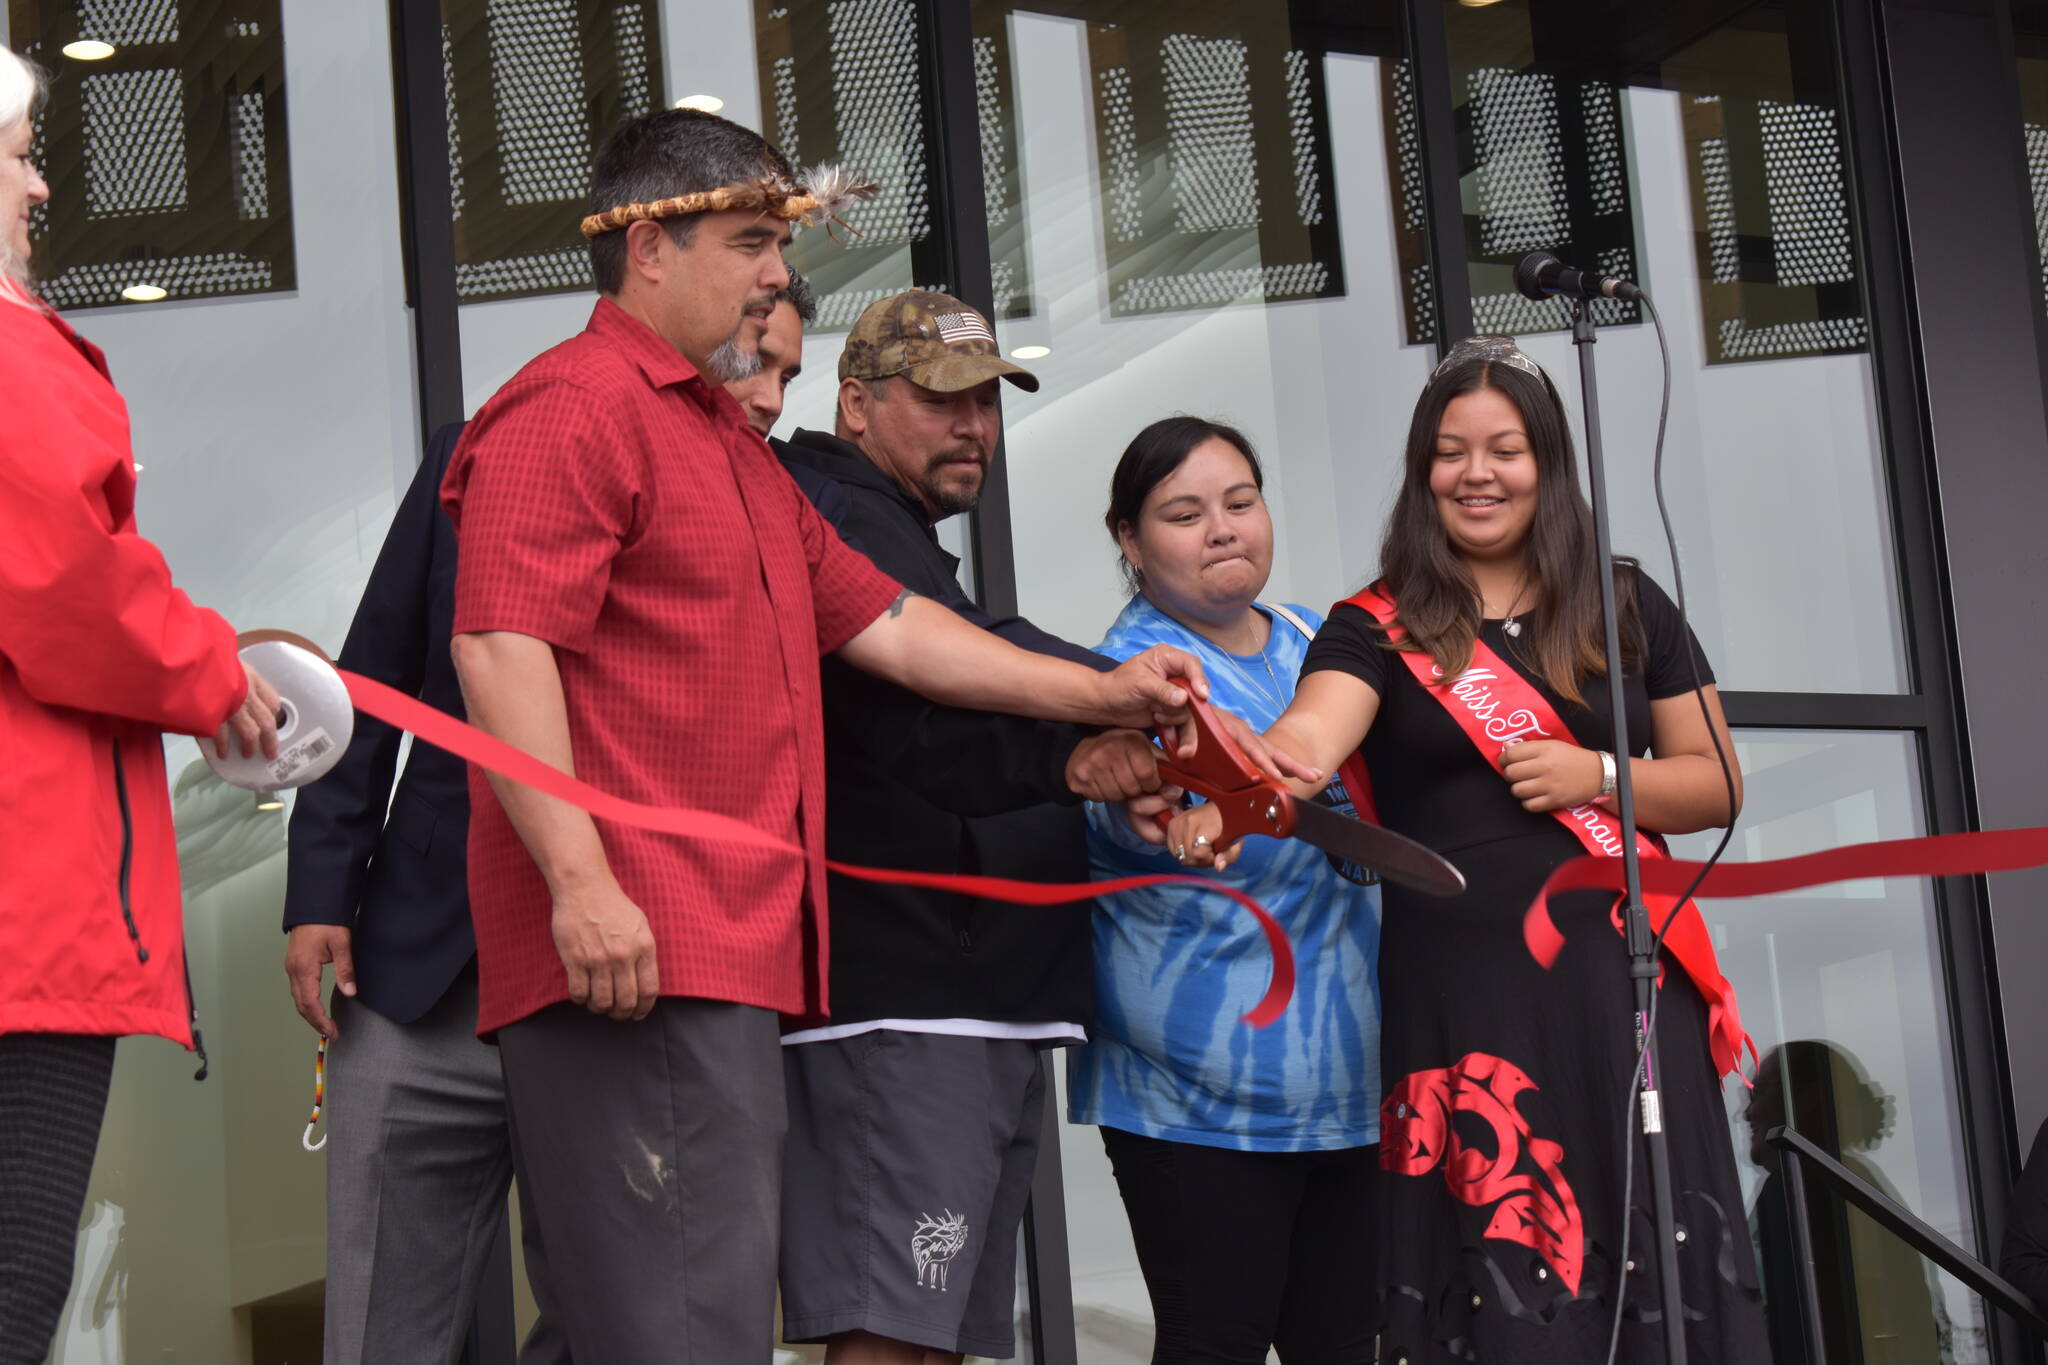 (Matthew N. Wells | The Daily World)
                                Quinault Indian Nation President Guy Capoeman (left) cuts the Quinault Wellness Center ceremonial ribbon with other members of the Quinault tribe on Aug. 31, in Aberdeen. The treatment center is excepted to have its grand opening on Oct. 3.